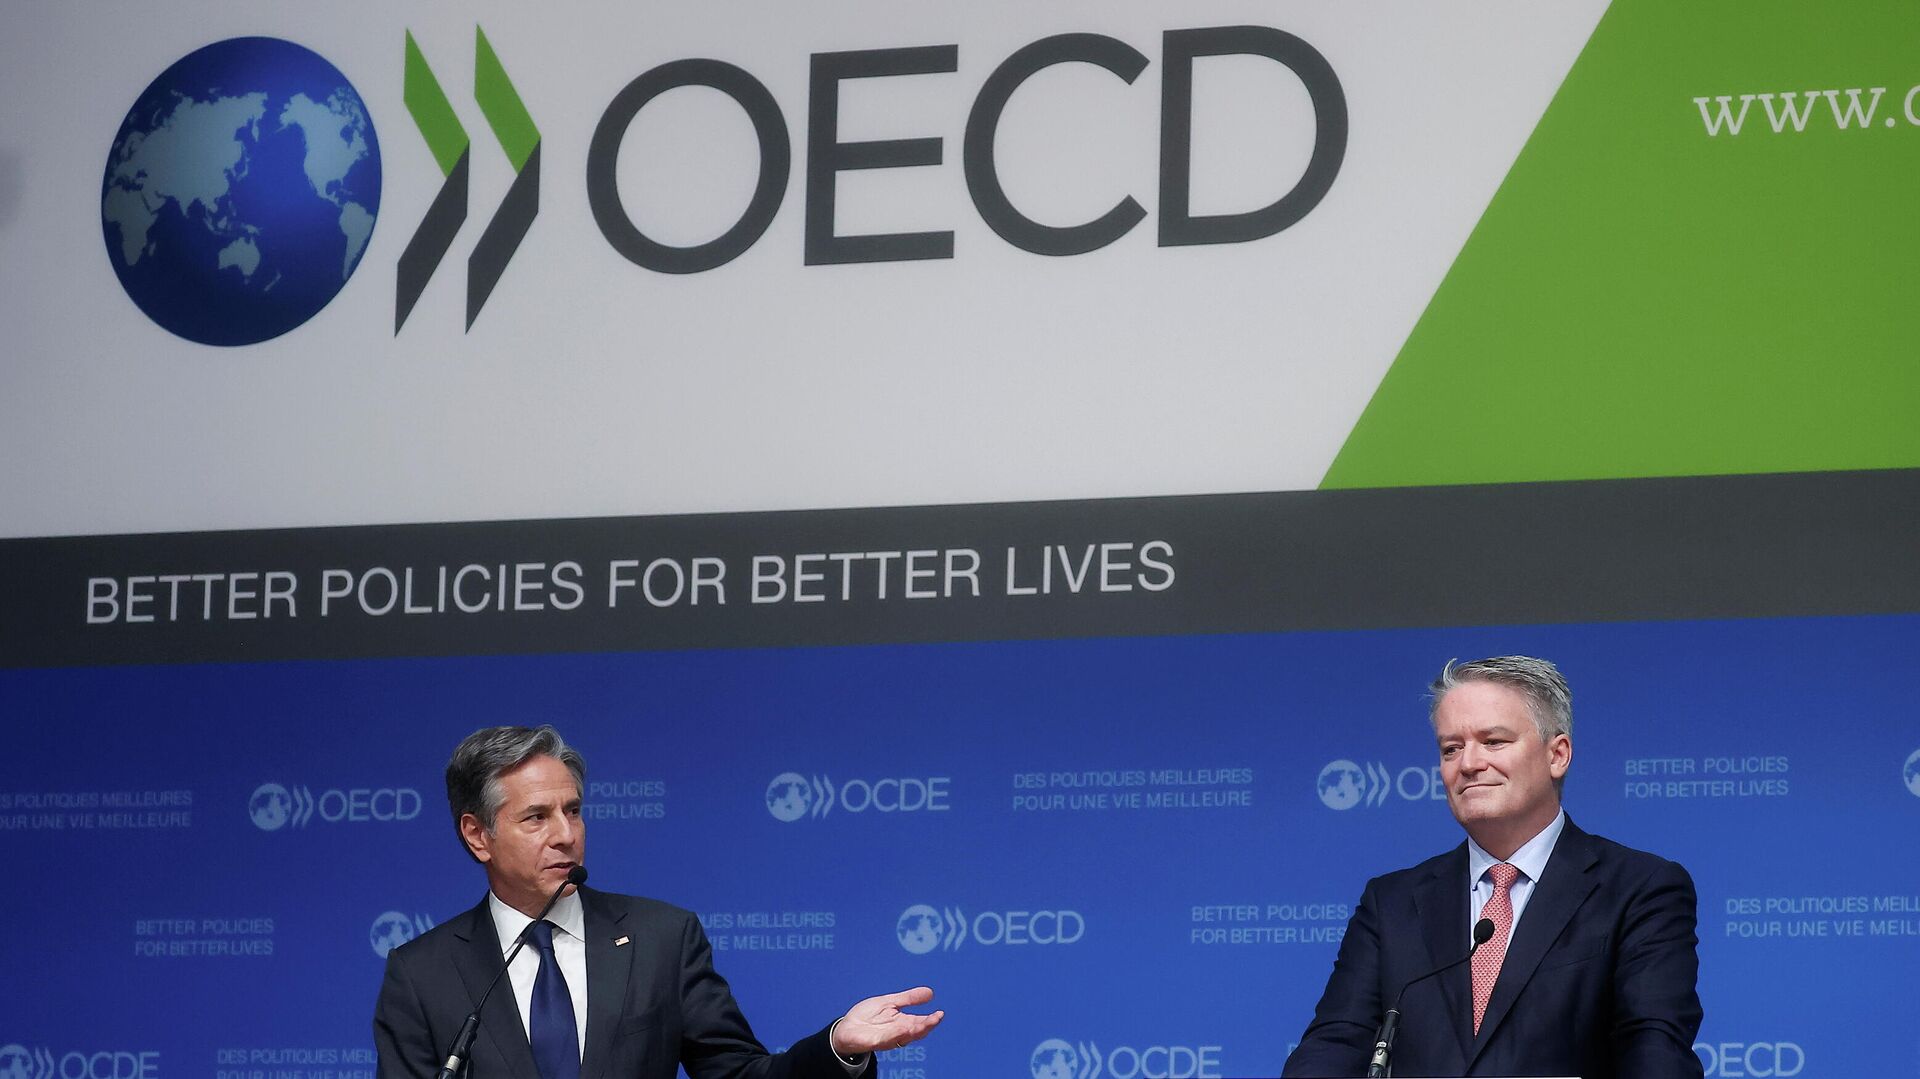 U.S. Secretary of State Antony Blinken speaks during a press briefing with Mathias Cormann, Secretary-General of the Organization for Economic Cooperation and Development, at the OECD's Ministerial Council Meeting, in Paris, France October 6, 2021. - Sputnik International, 1920, 08.10.2021